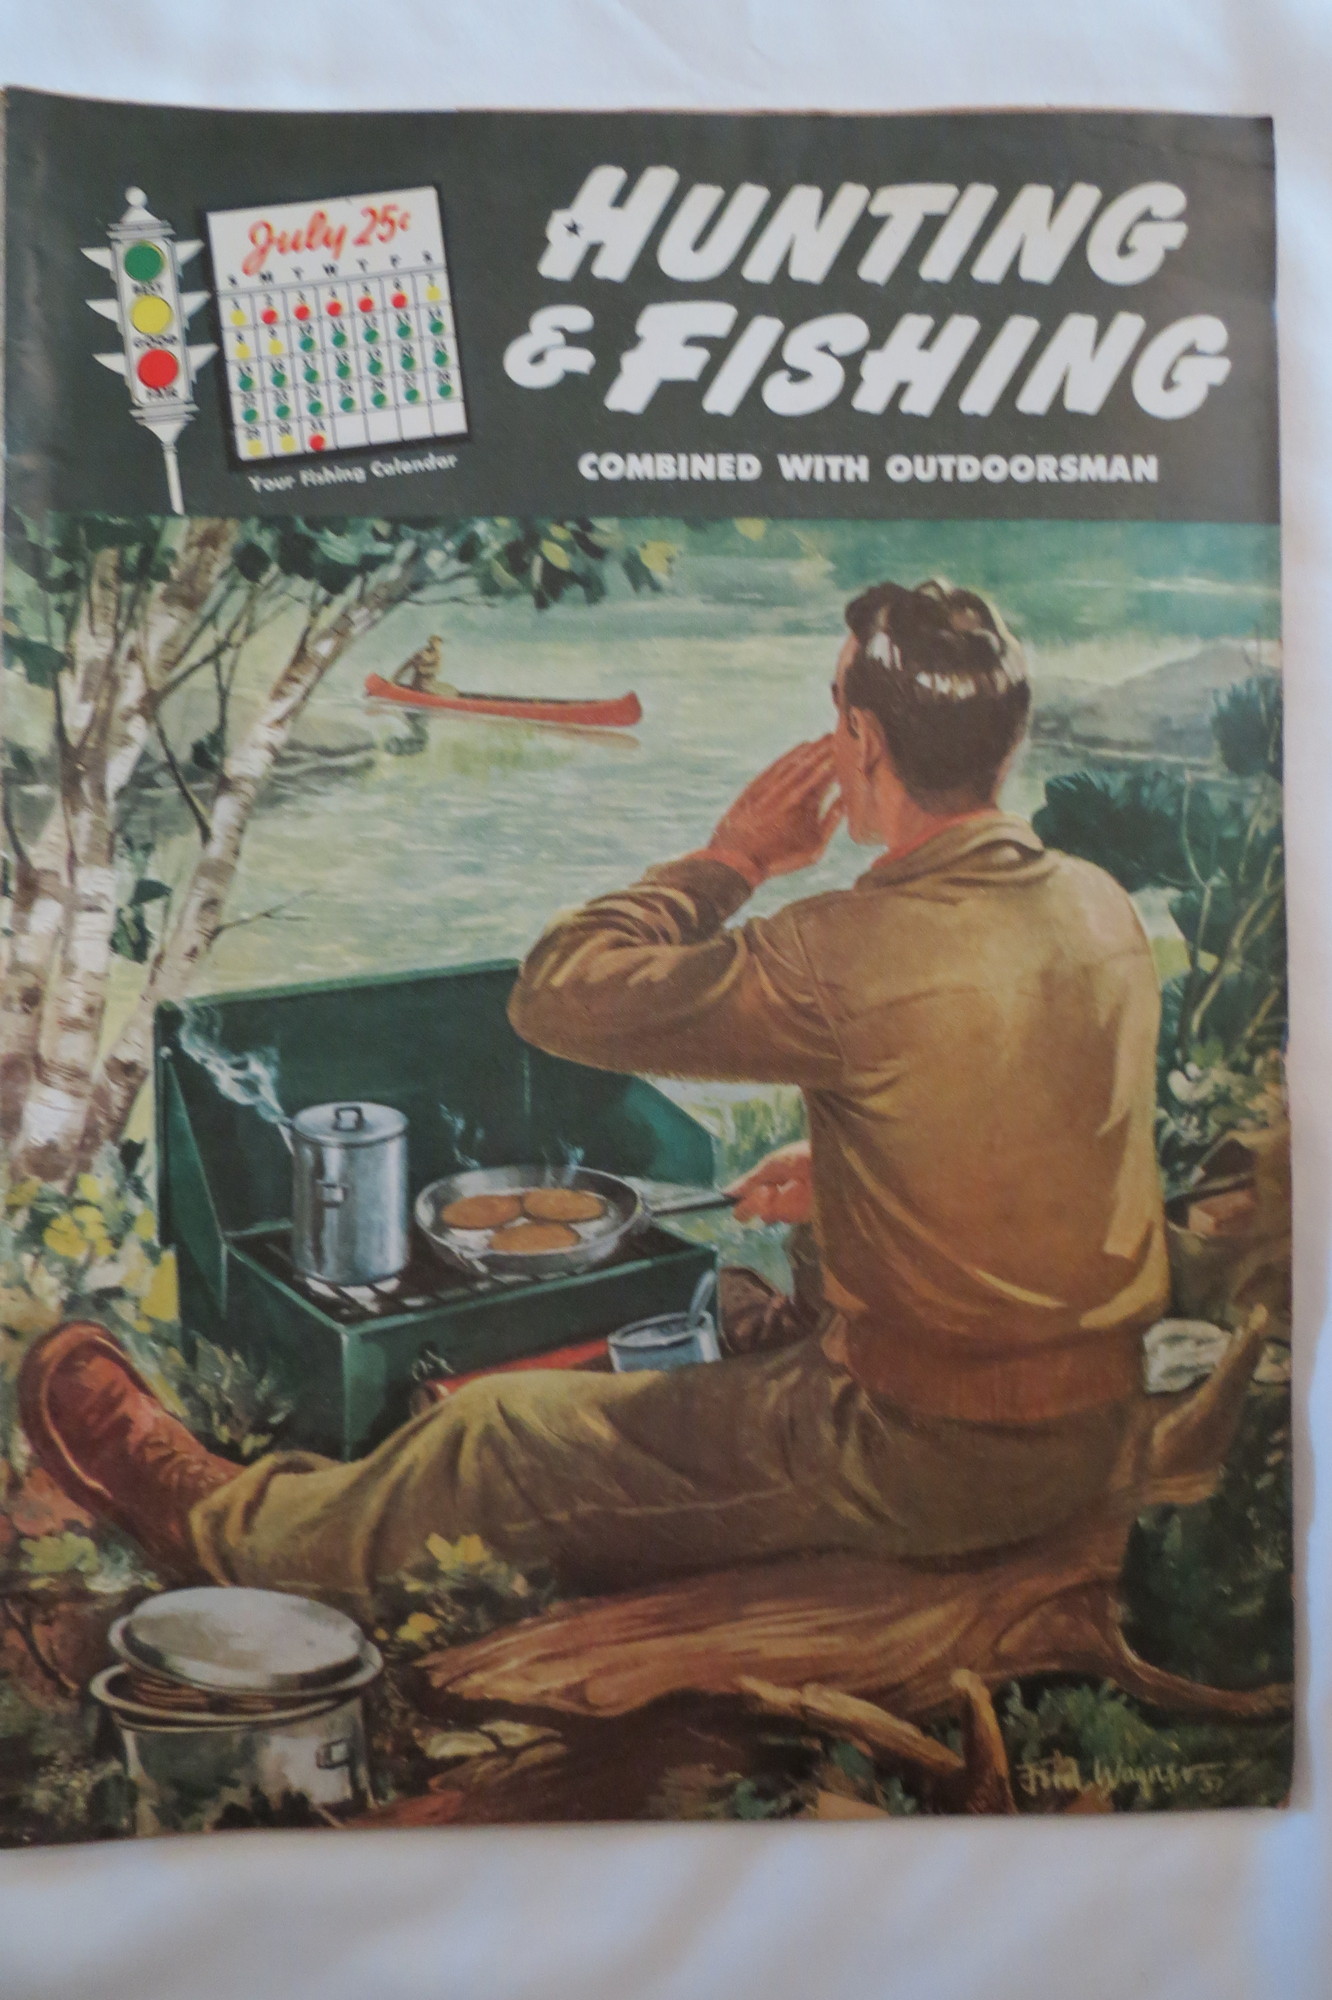 HUNTING & FISHING MAGAZINE COMBINED WITH OUTDOORSMAN, JULY 1951